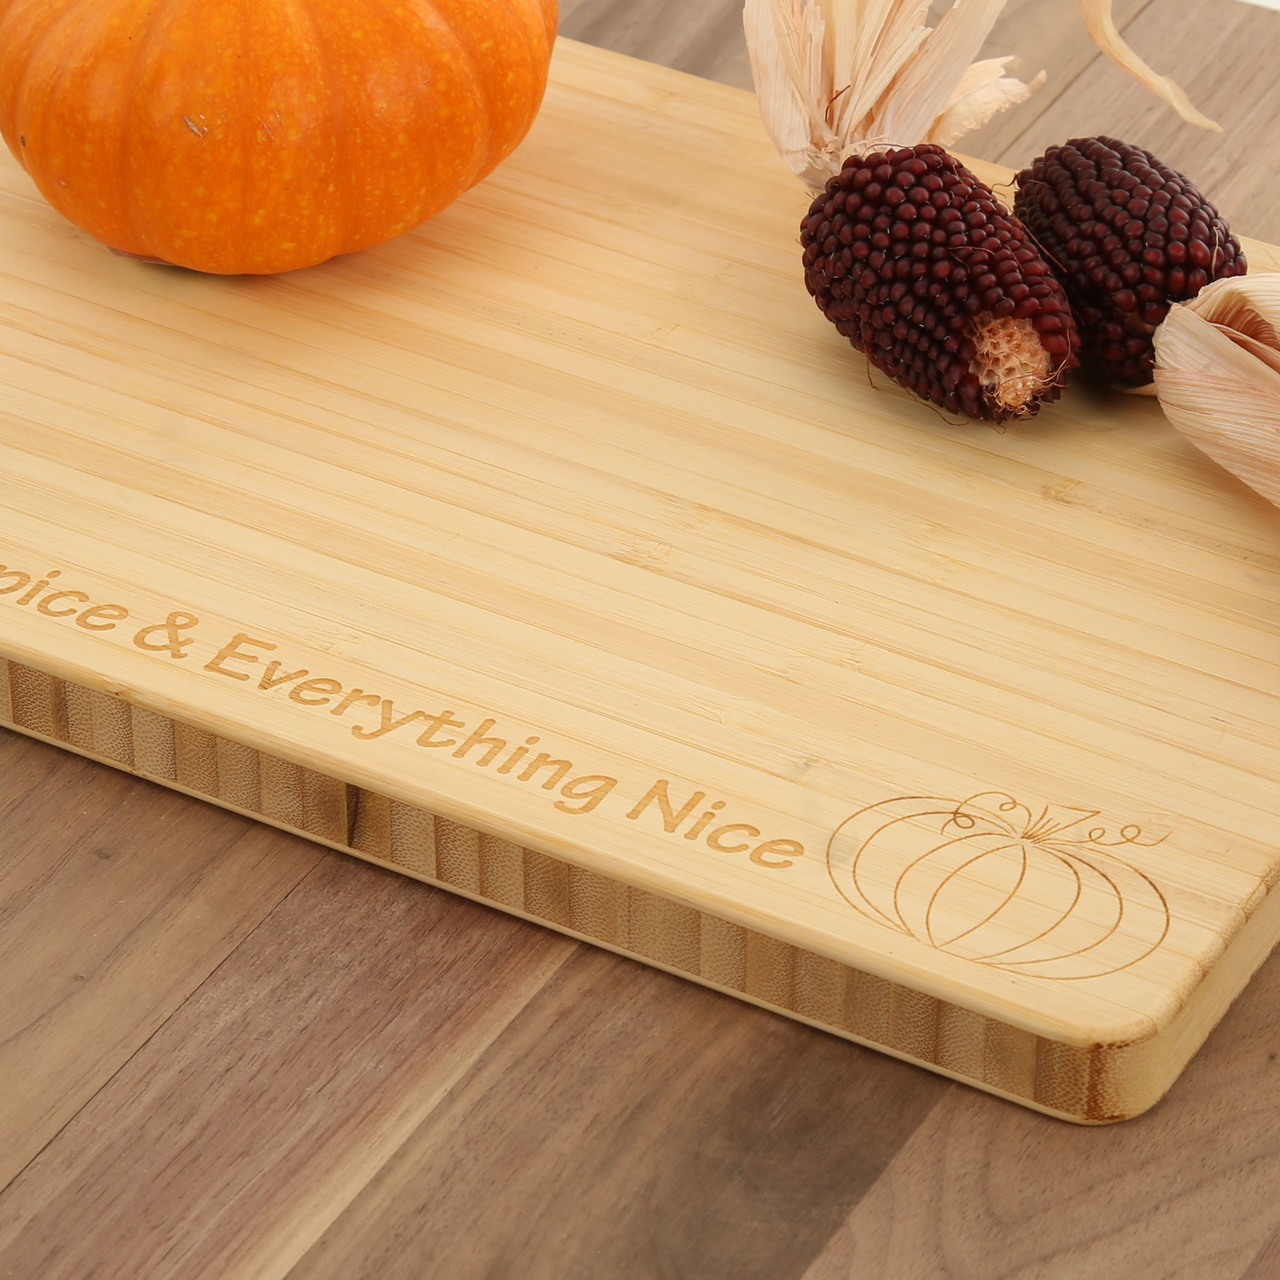 Pumpkin Spice and Everything Nice - Bamboo Cutting Board 